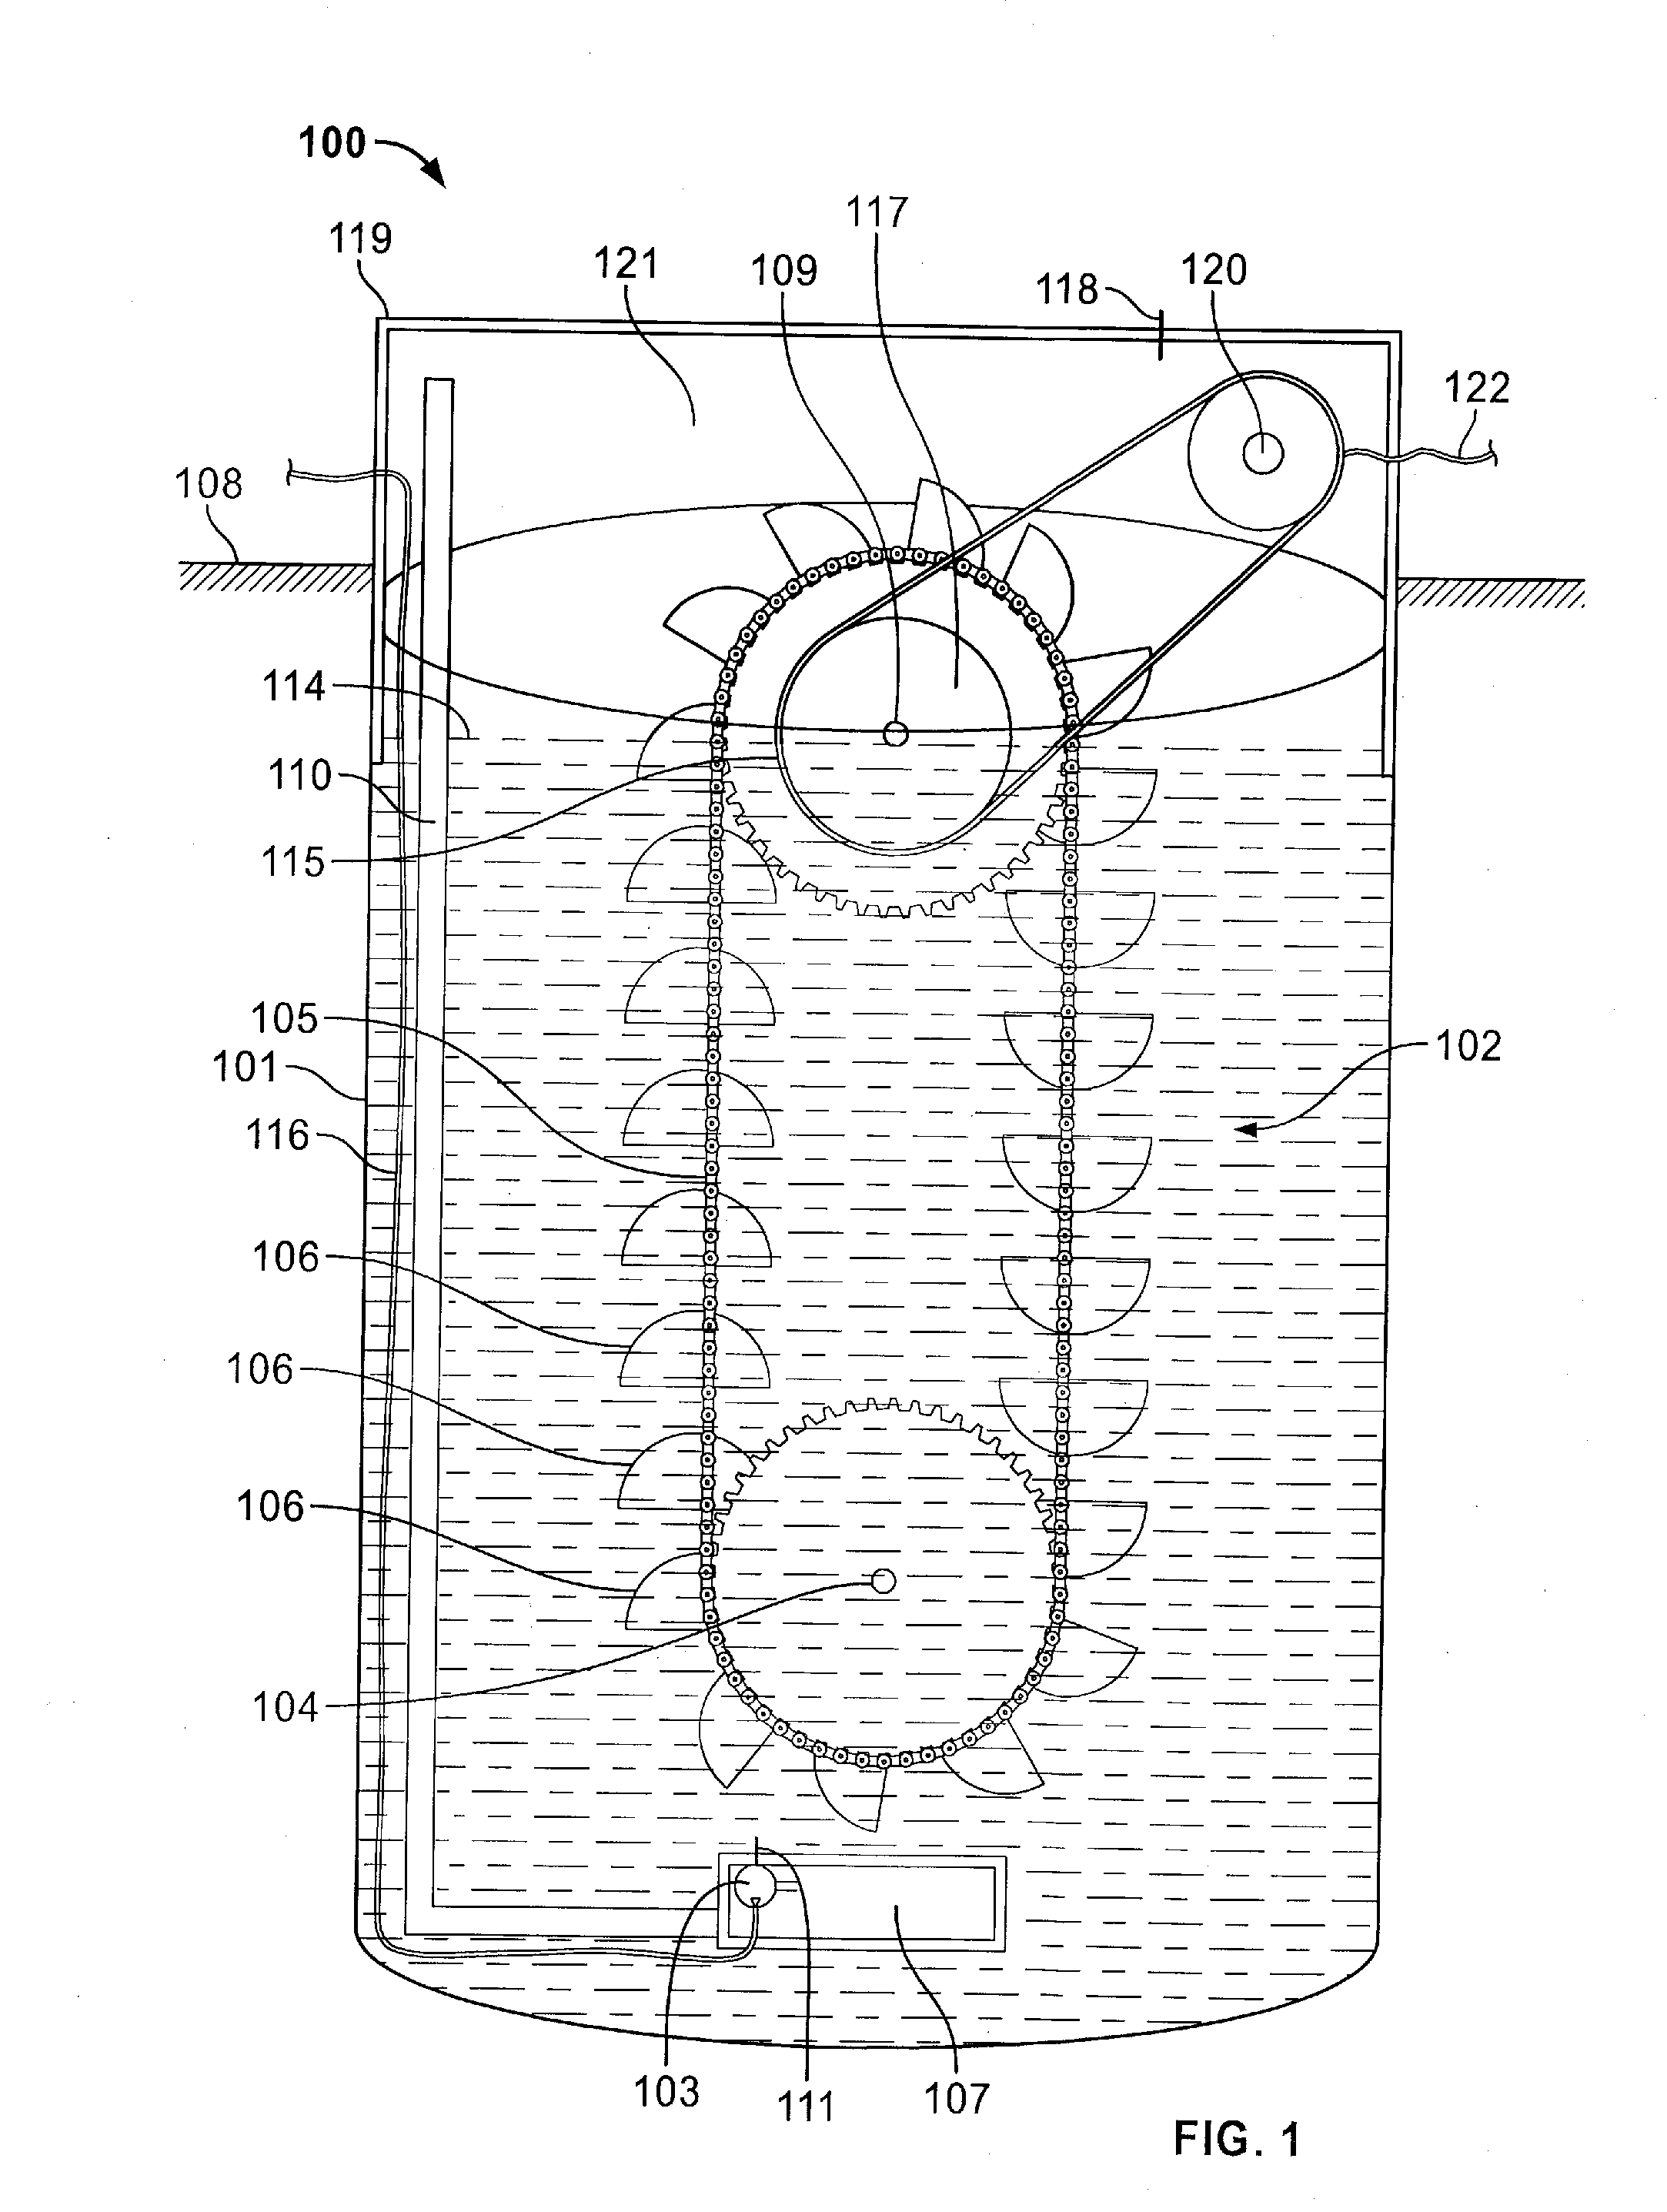 Well Buoyancy Elevator and Conveyor Power Apparatus and Method